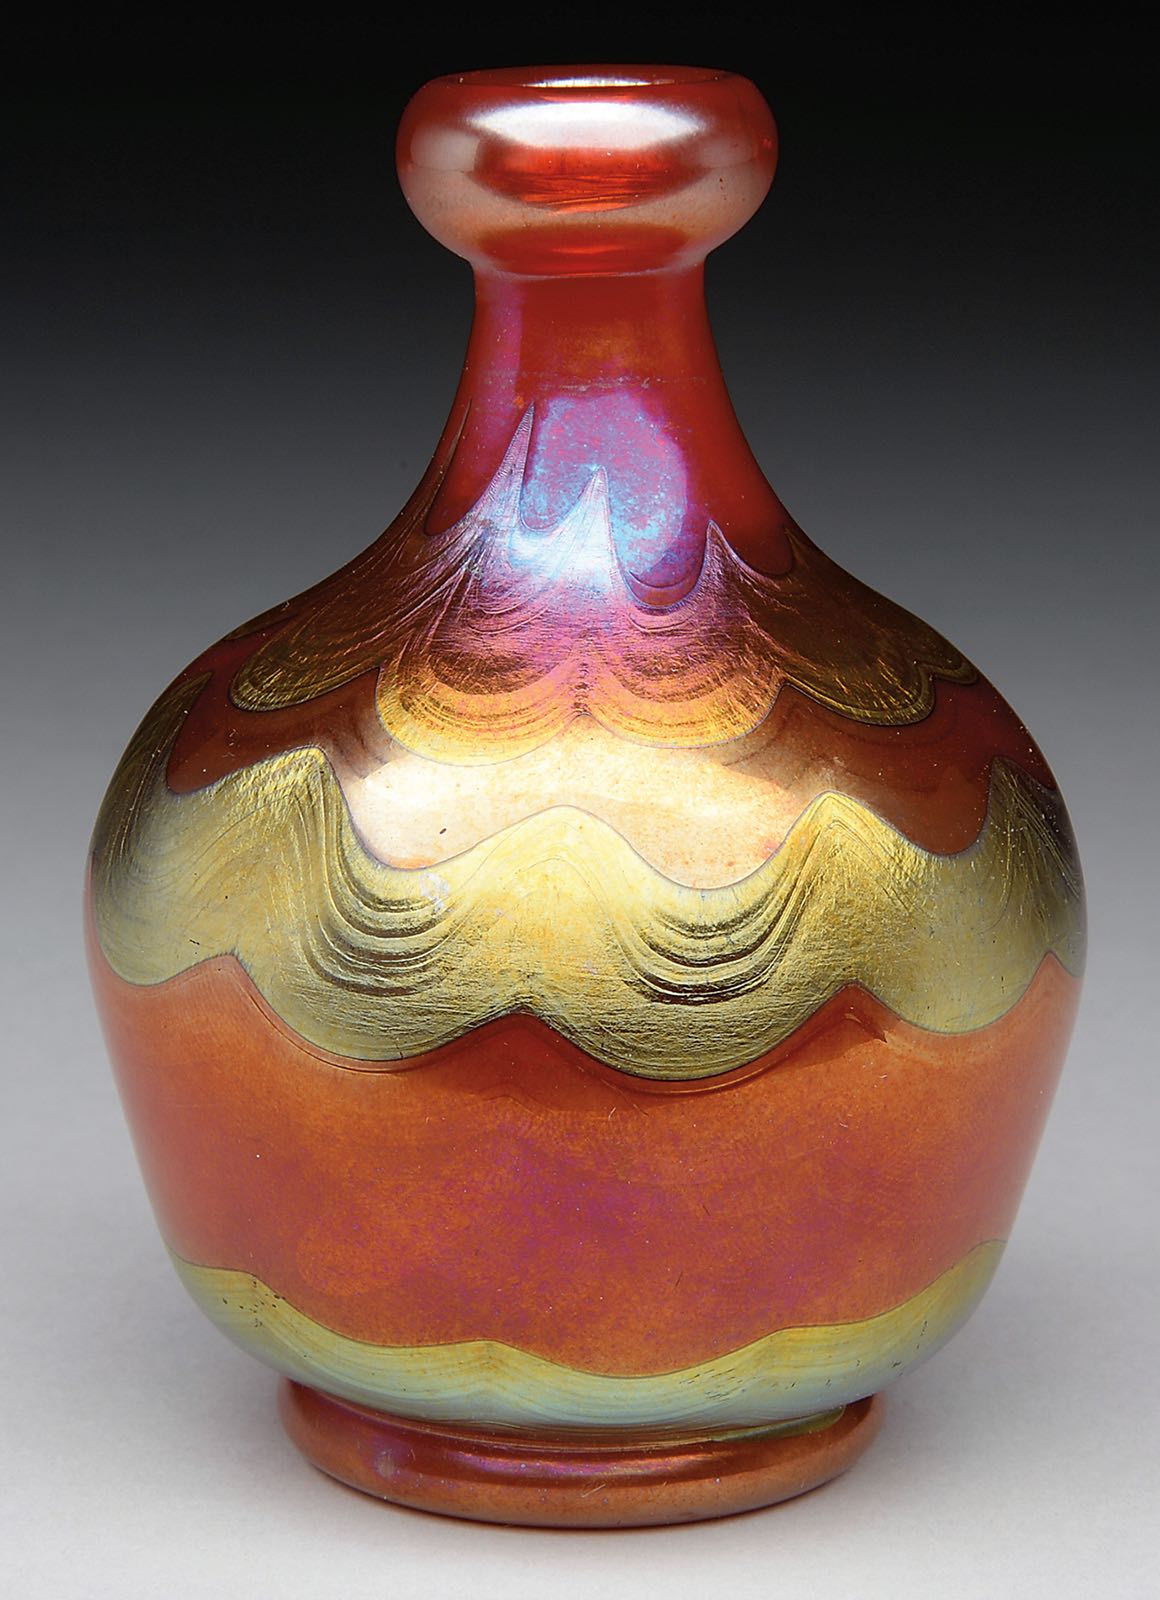 Lot #1258, a Tiffany Red Favrile Vase estimated at $7,000-10,000.